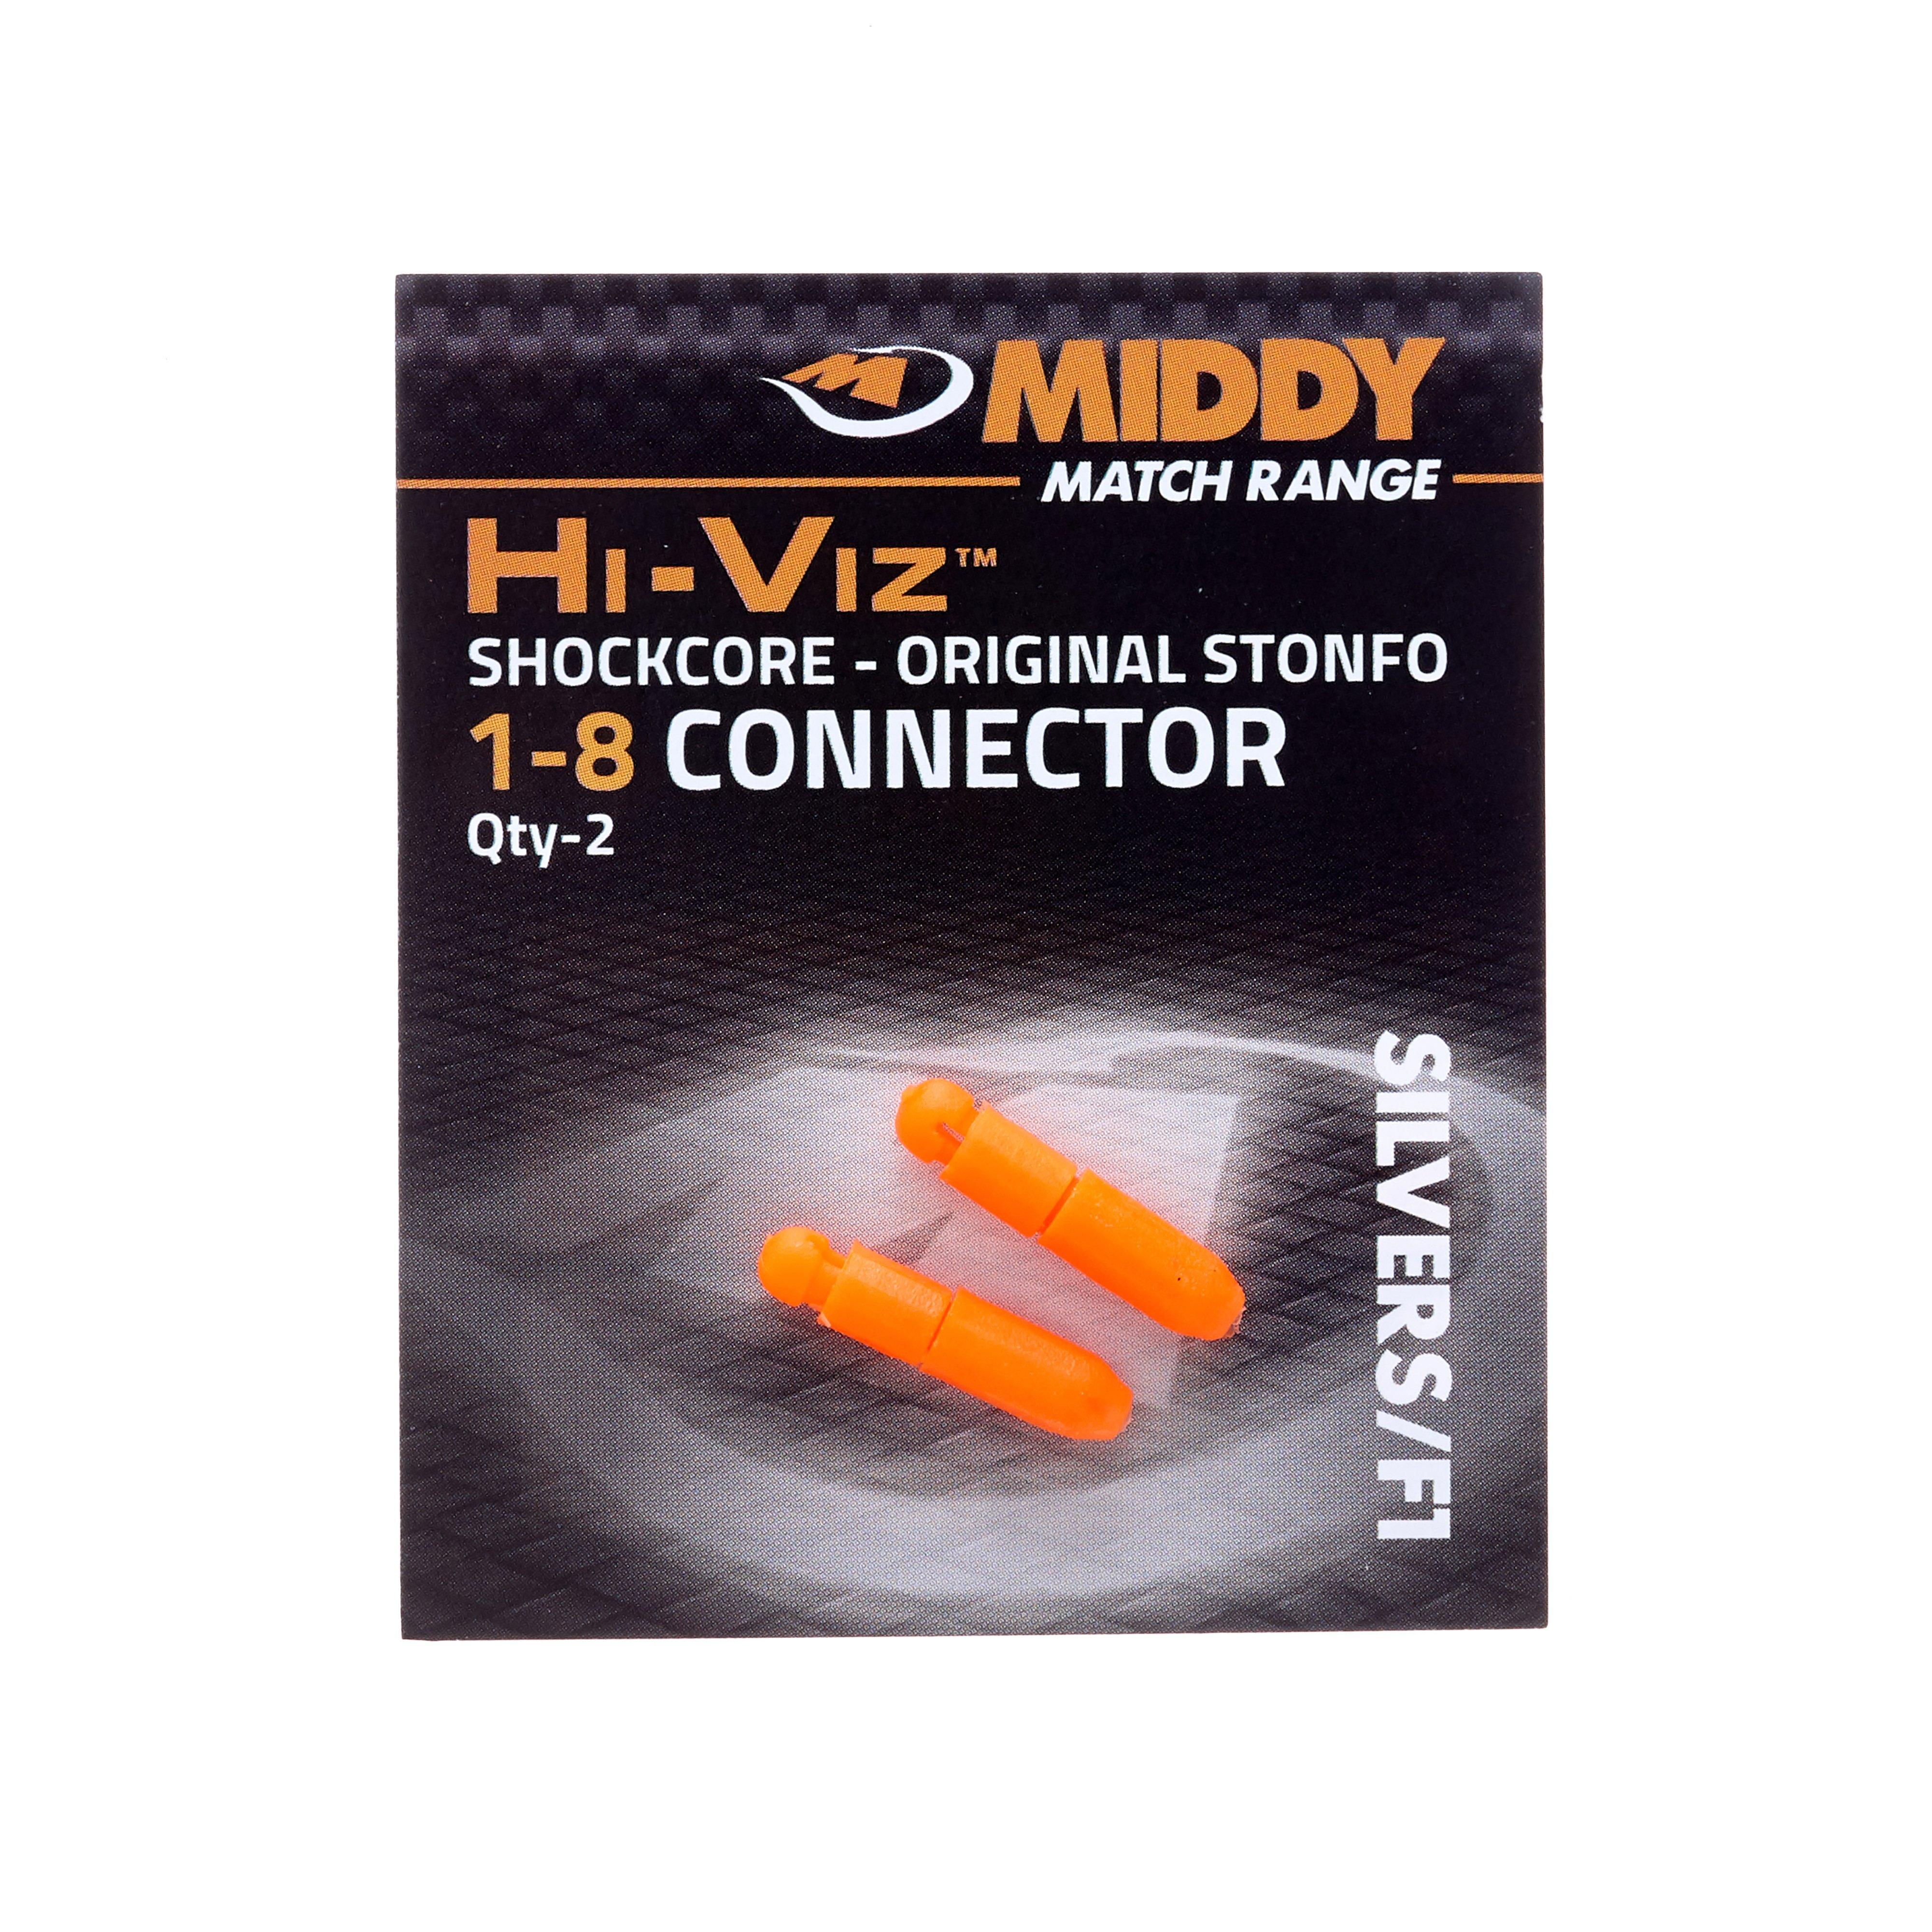 Middy 1-5 Silverfish PTFE Review